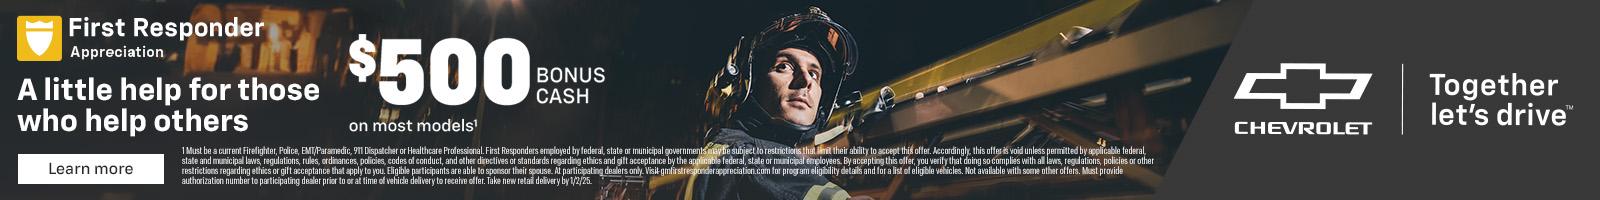 First Responder appreciation. A little help for those who help others. $500 BONUS CASH on most models.